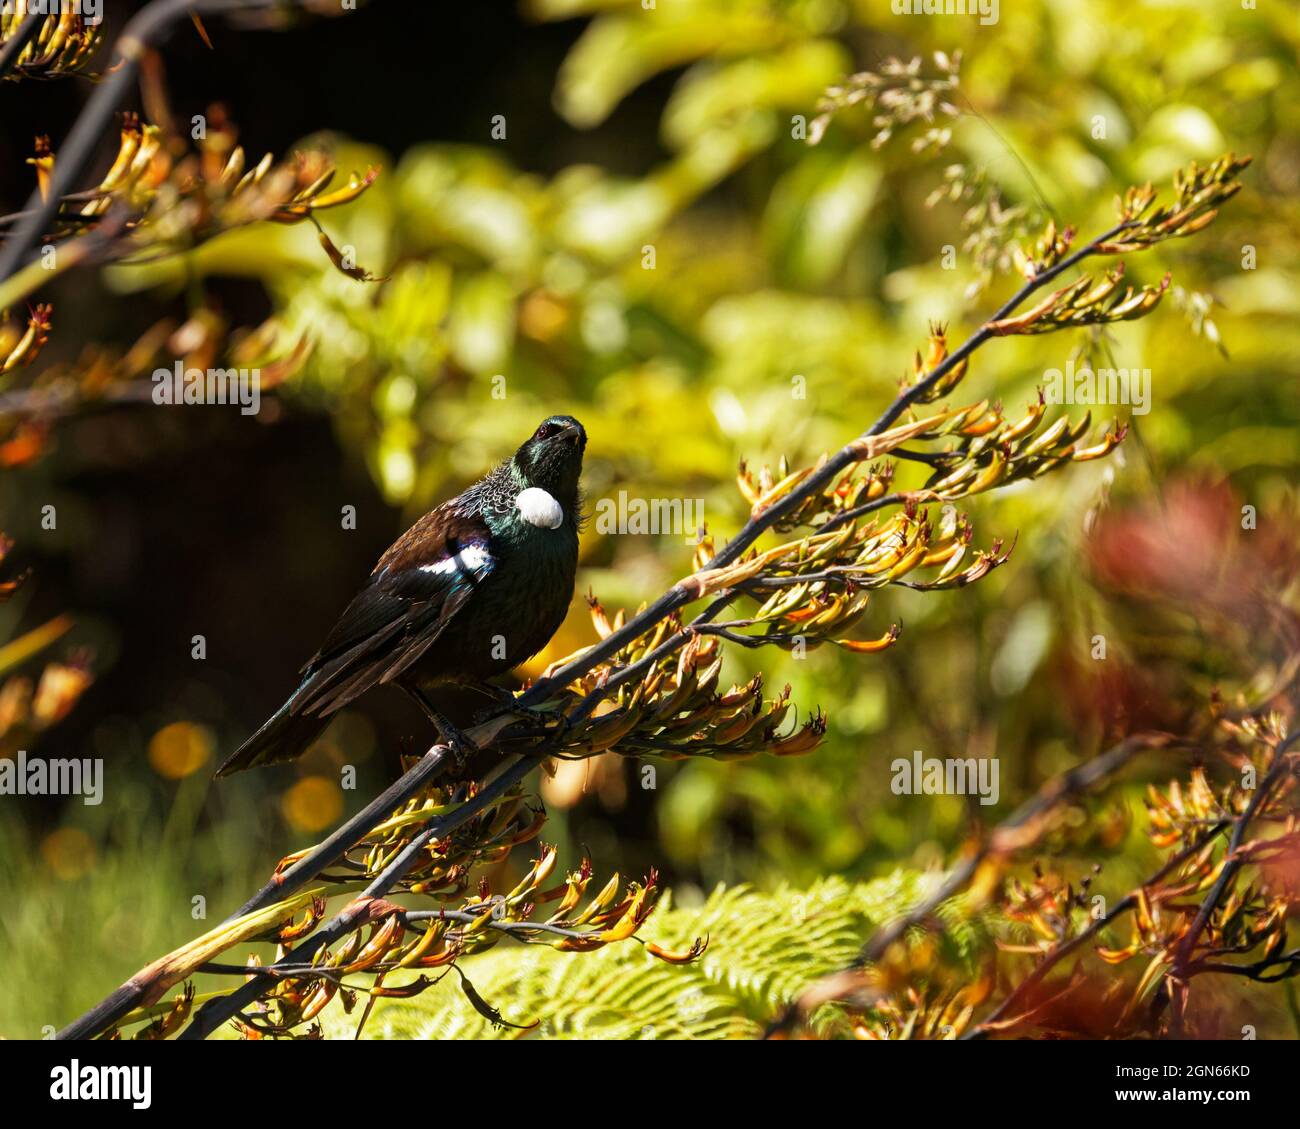 Tui, endemic passerine bird of New Zealand, on a flax plant looking toward the camera Stock Photo